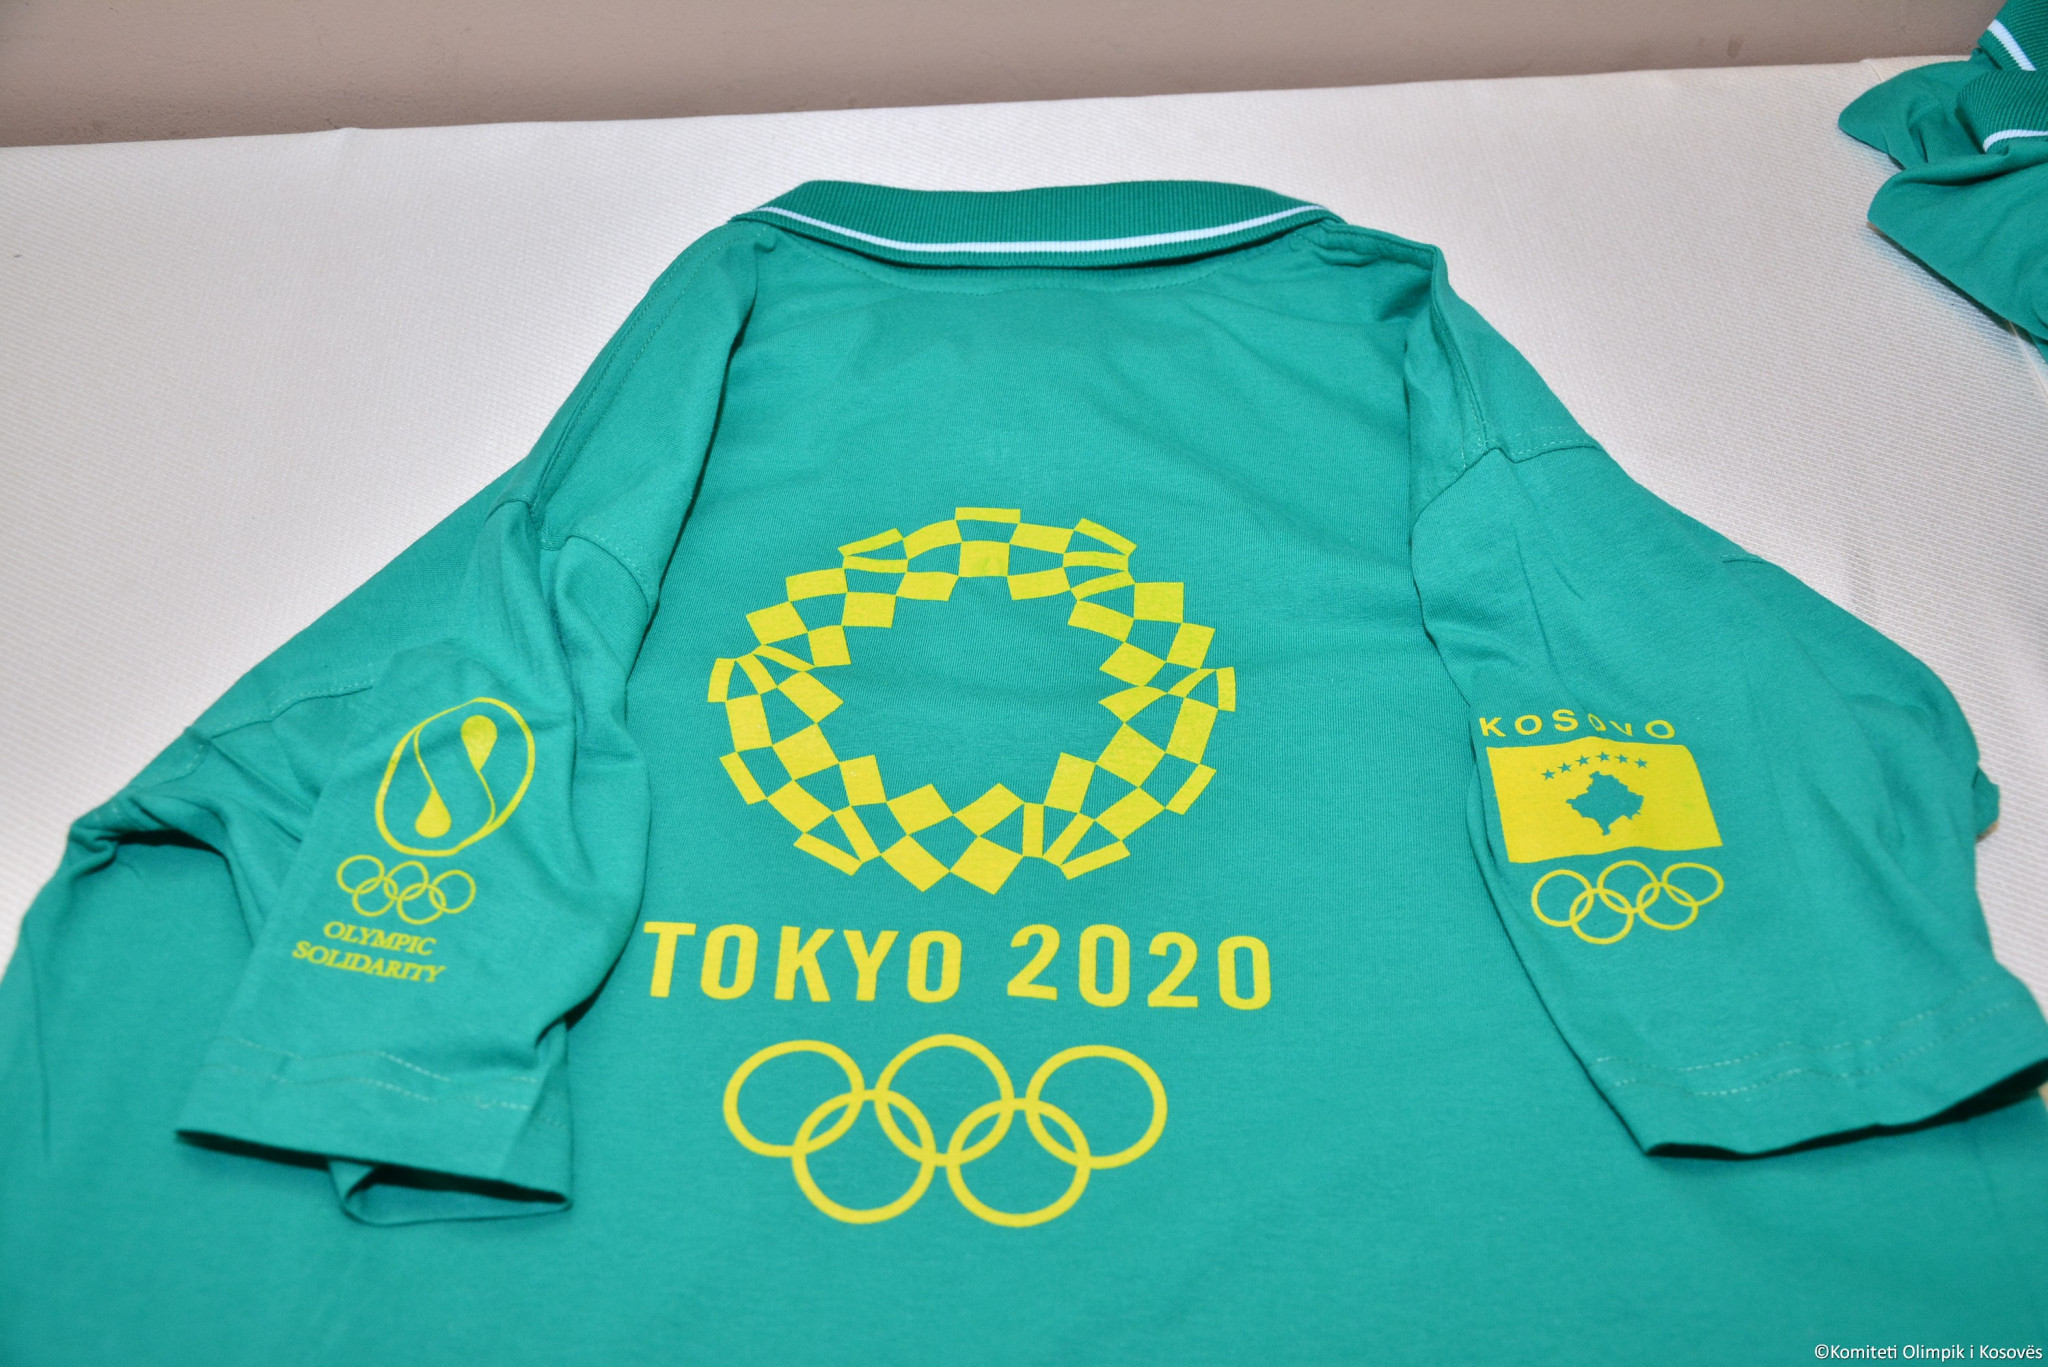 The jersey which will be worn by athletes from Kosovo at the Tokyo 2020 Olympics ©Kosovo Olympic Committee